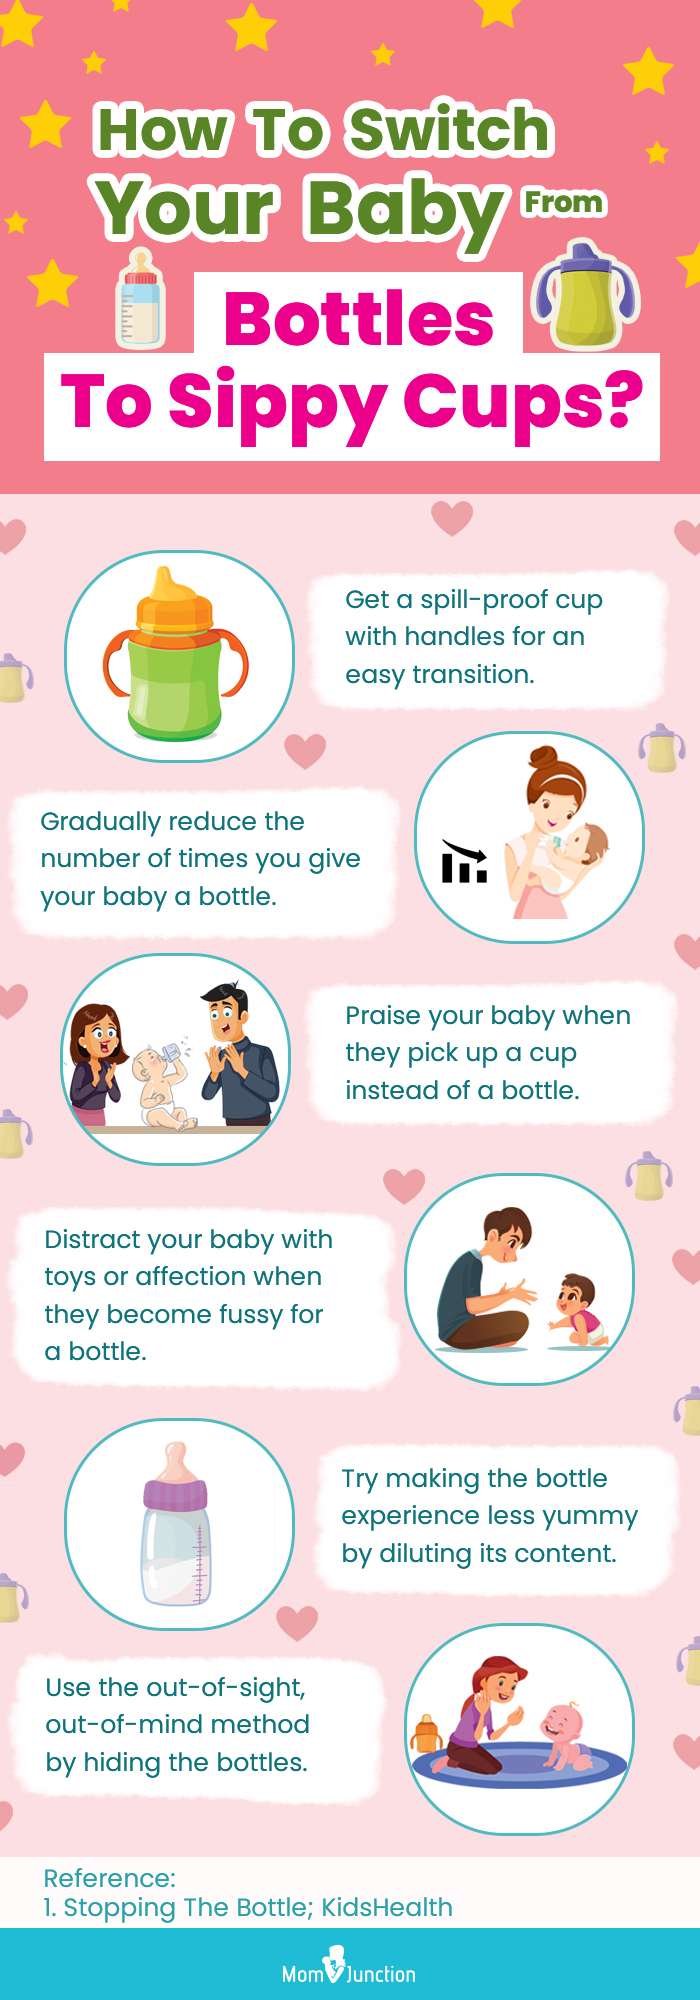 https://www.momjunction.com/wp-content/uploads/2023/01/How-to-Switch-Your-Baby-From-Bottles-To-Sippy-Cups.jpg